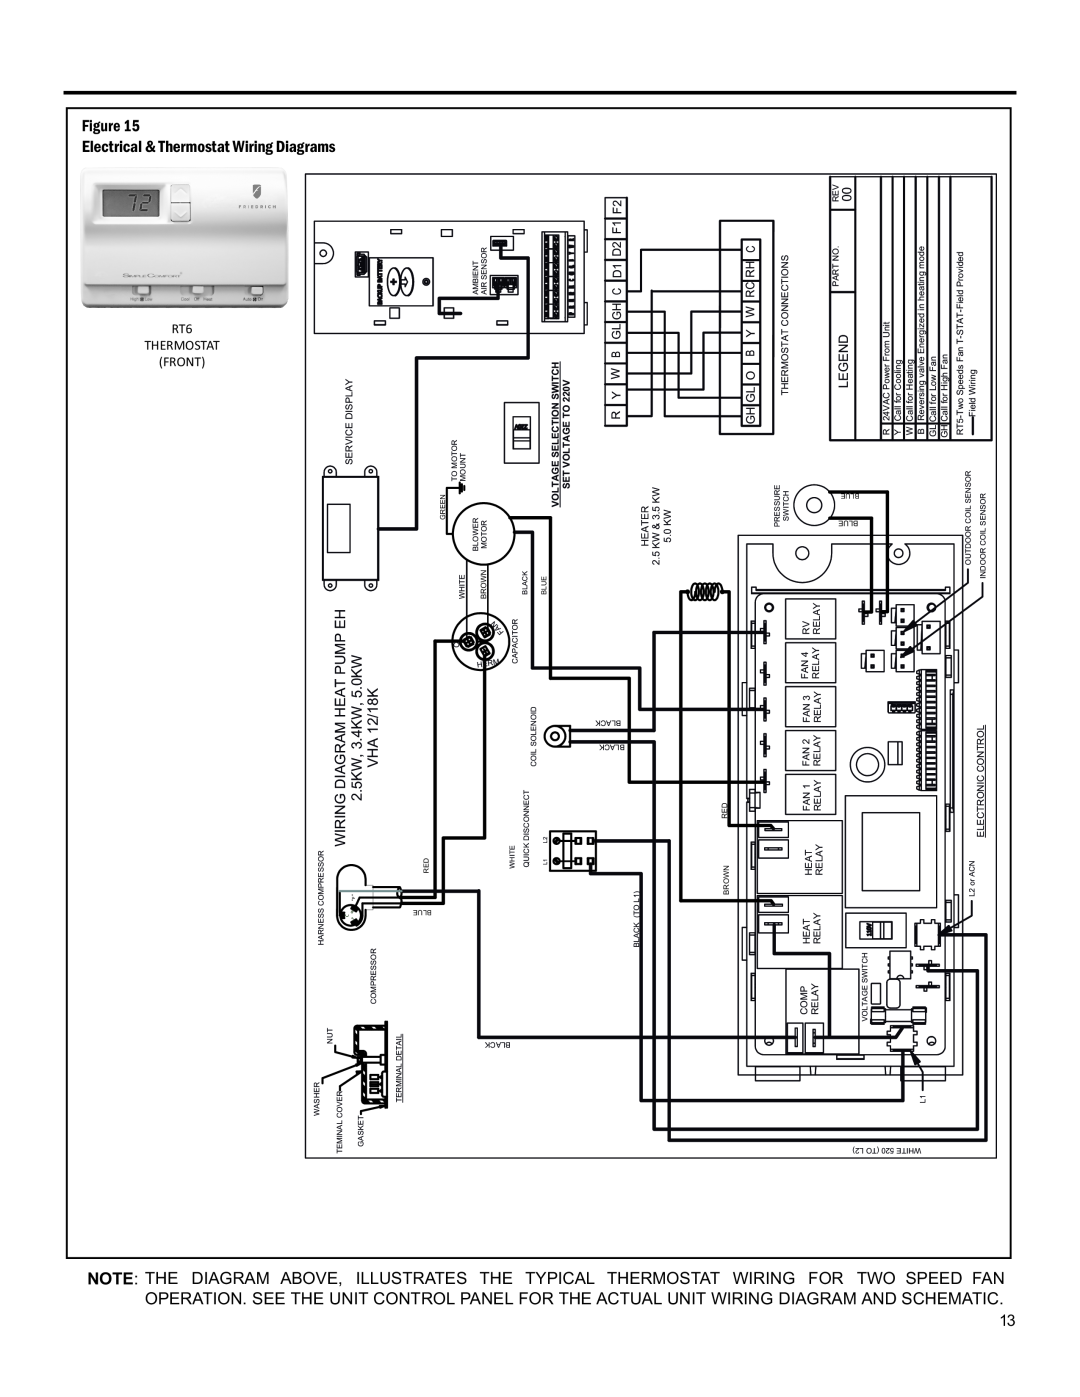 Friedrich 920-075-13 (1-11) Pump Eh, 2.5KW, 3.4KW, 5.0KW, Front, Figure, Electrical & Thermostat Wiring Diagrams 